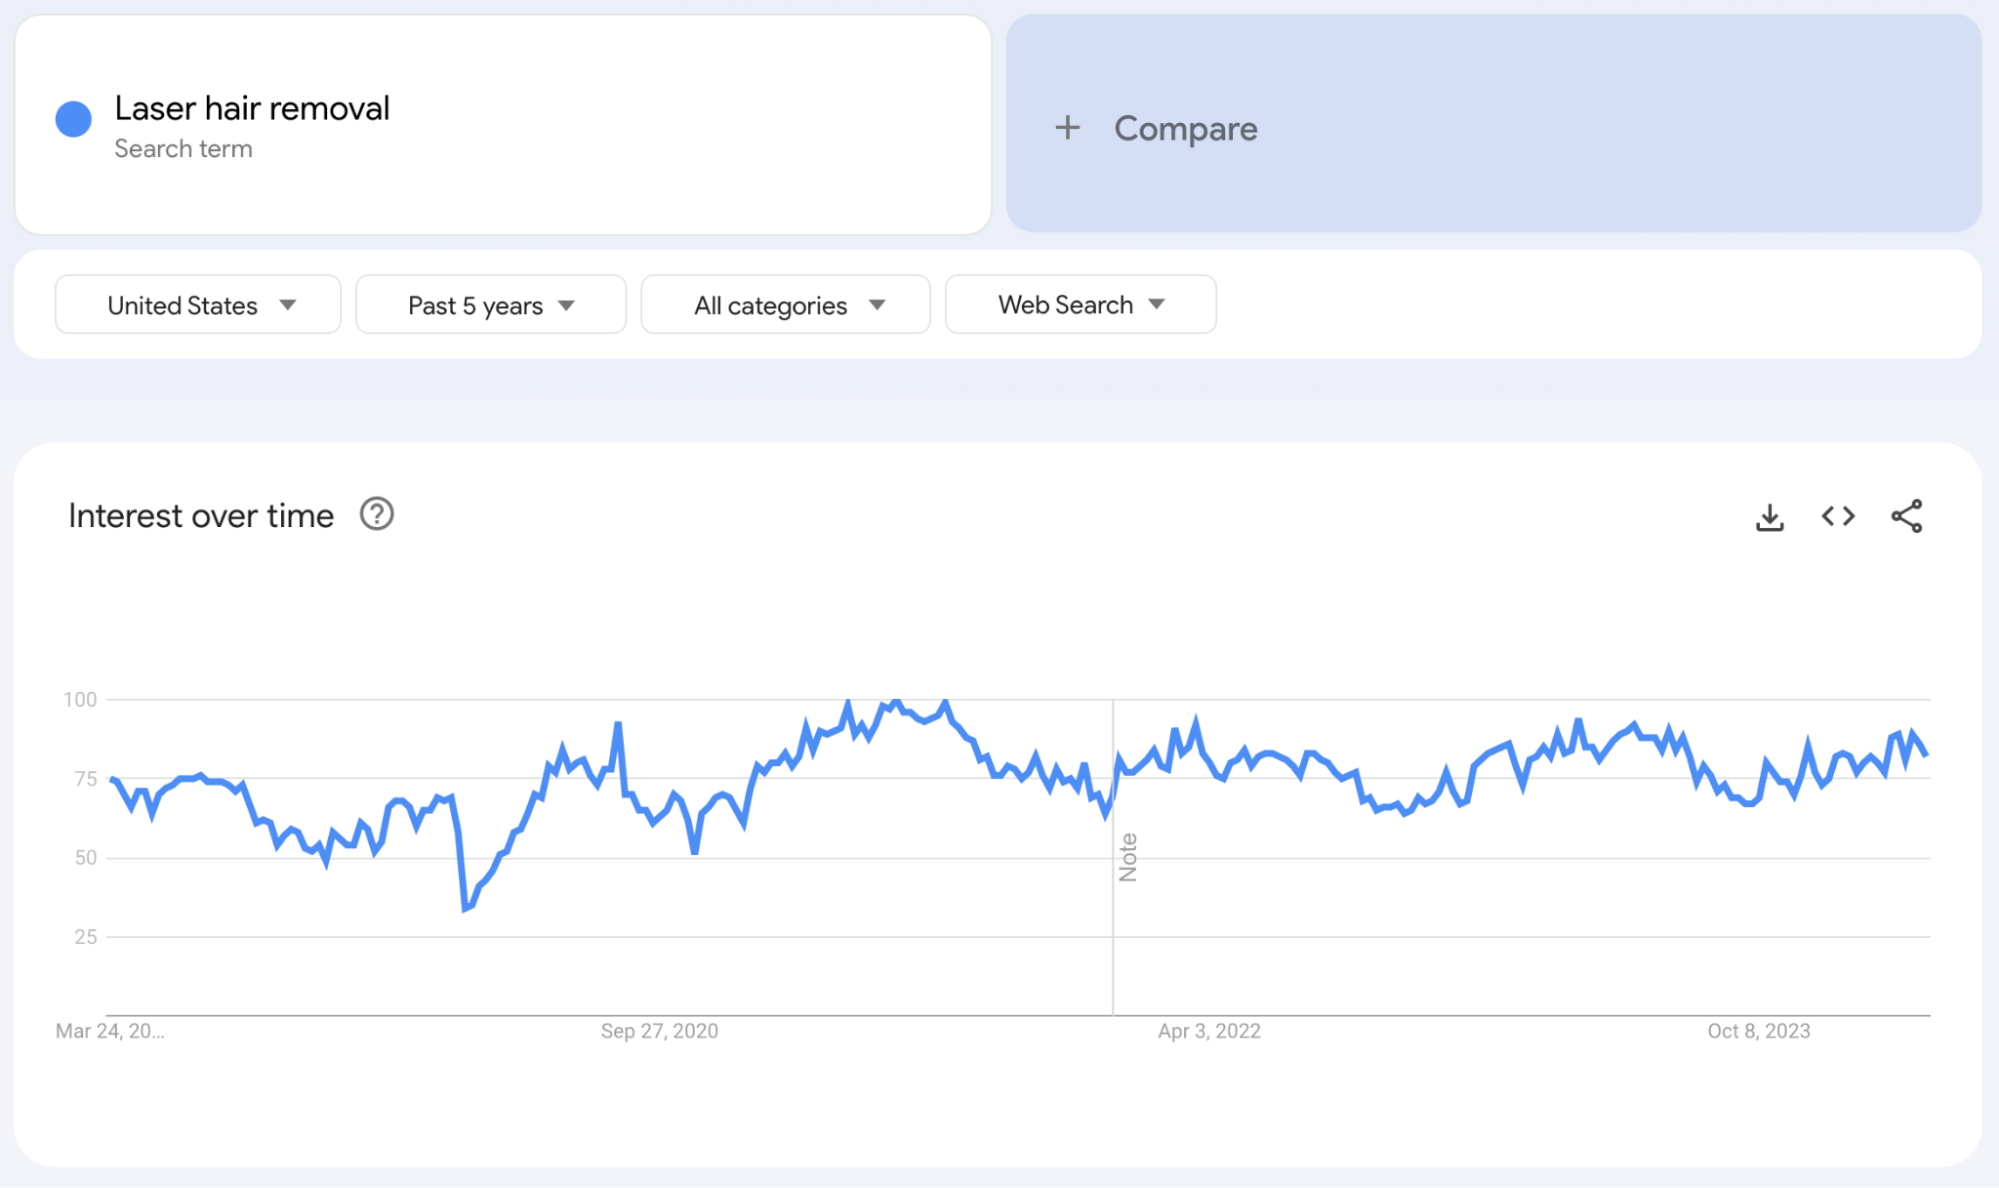 Google Trends report for “laser hair removal”.